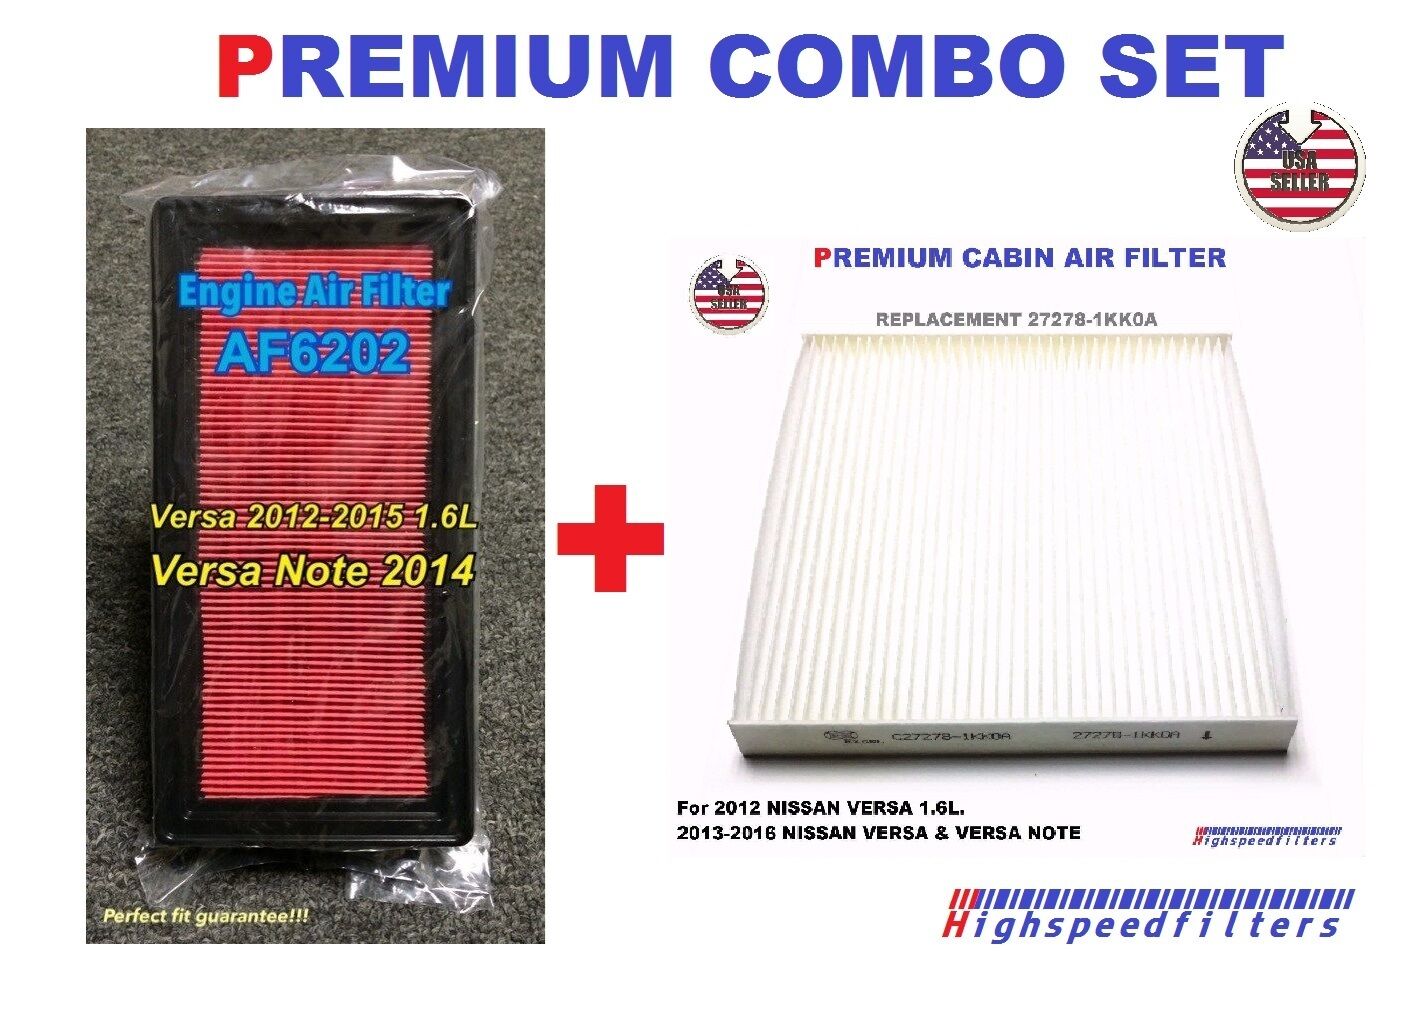 PREMIUM Air Filter + Cabin Filter COMBO set for 2014 - 2019 NISSAN VERSA & NOTE